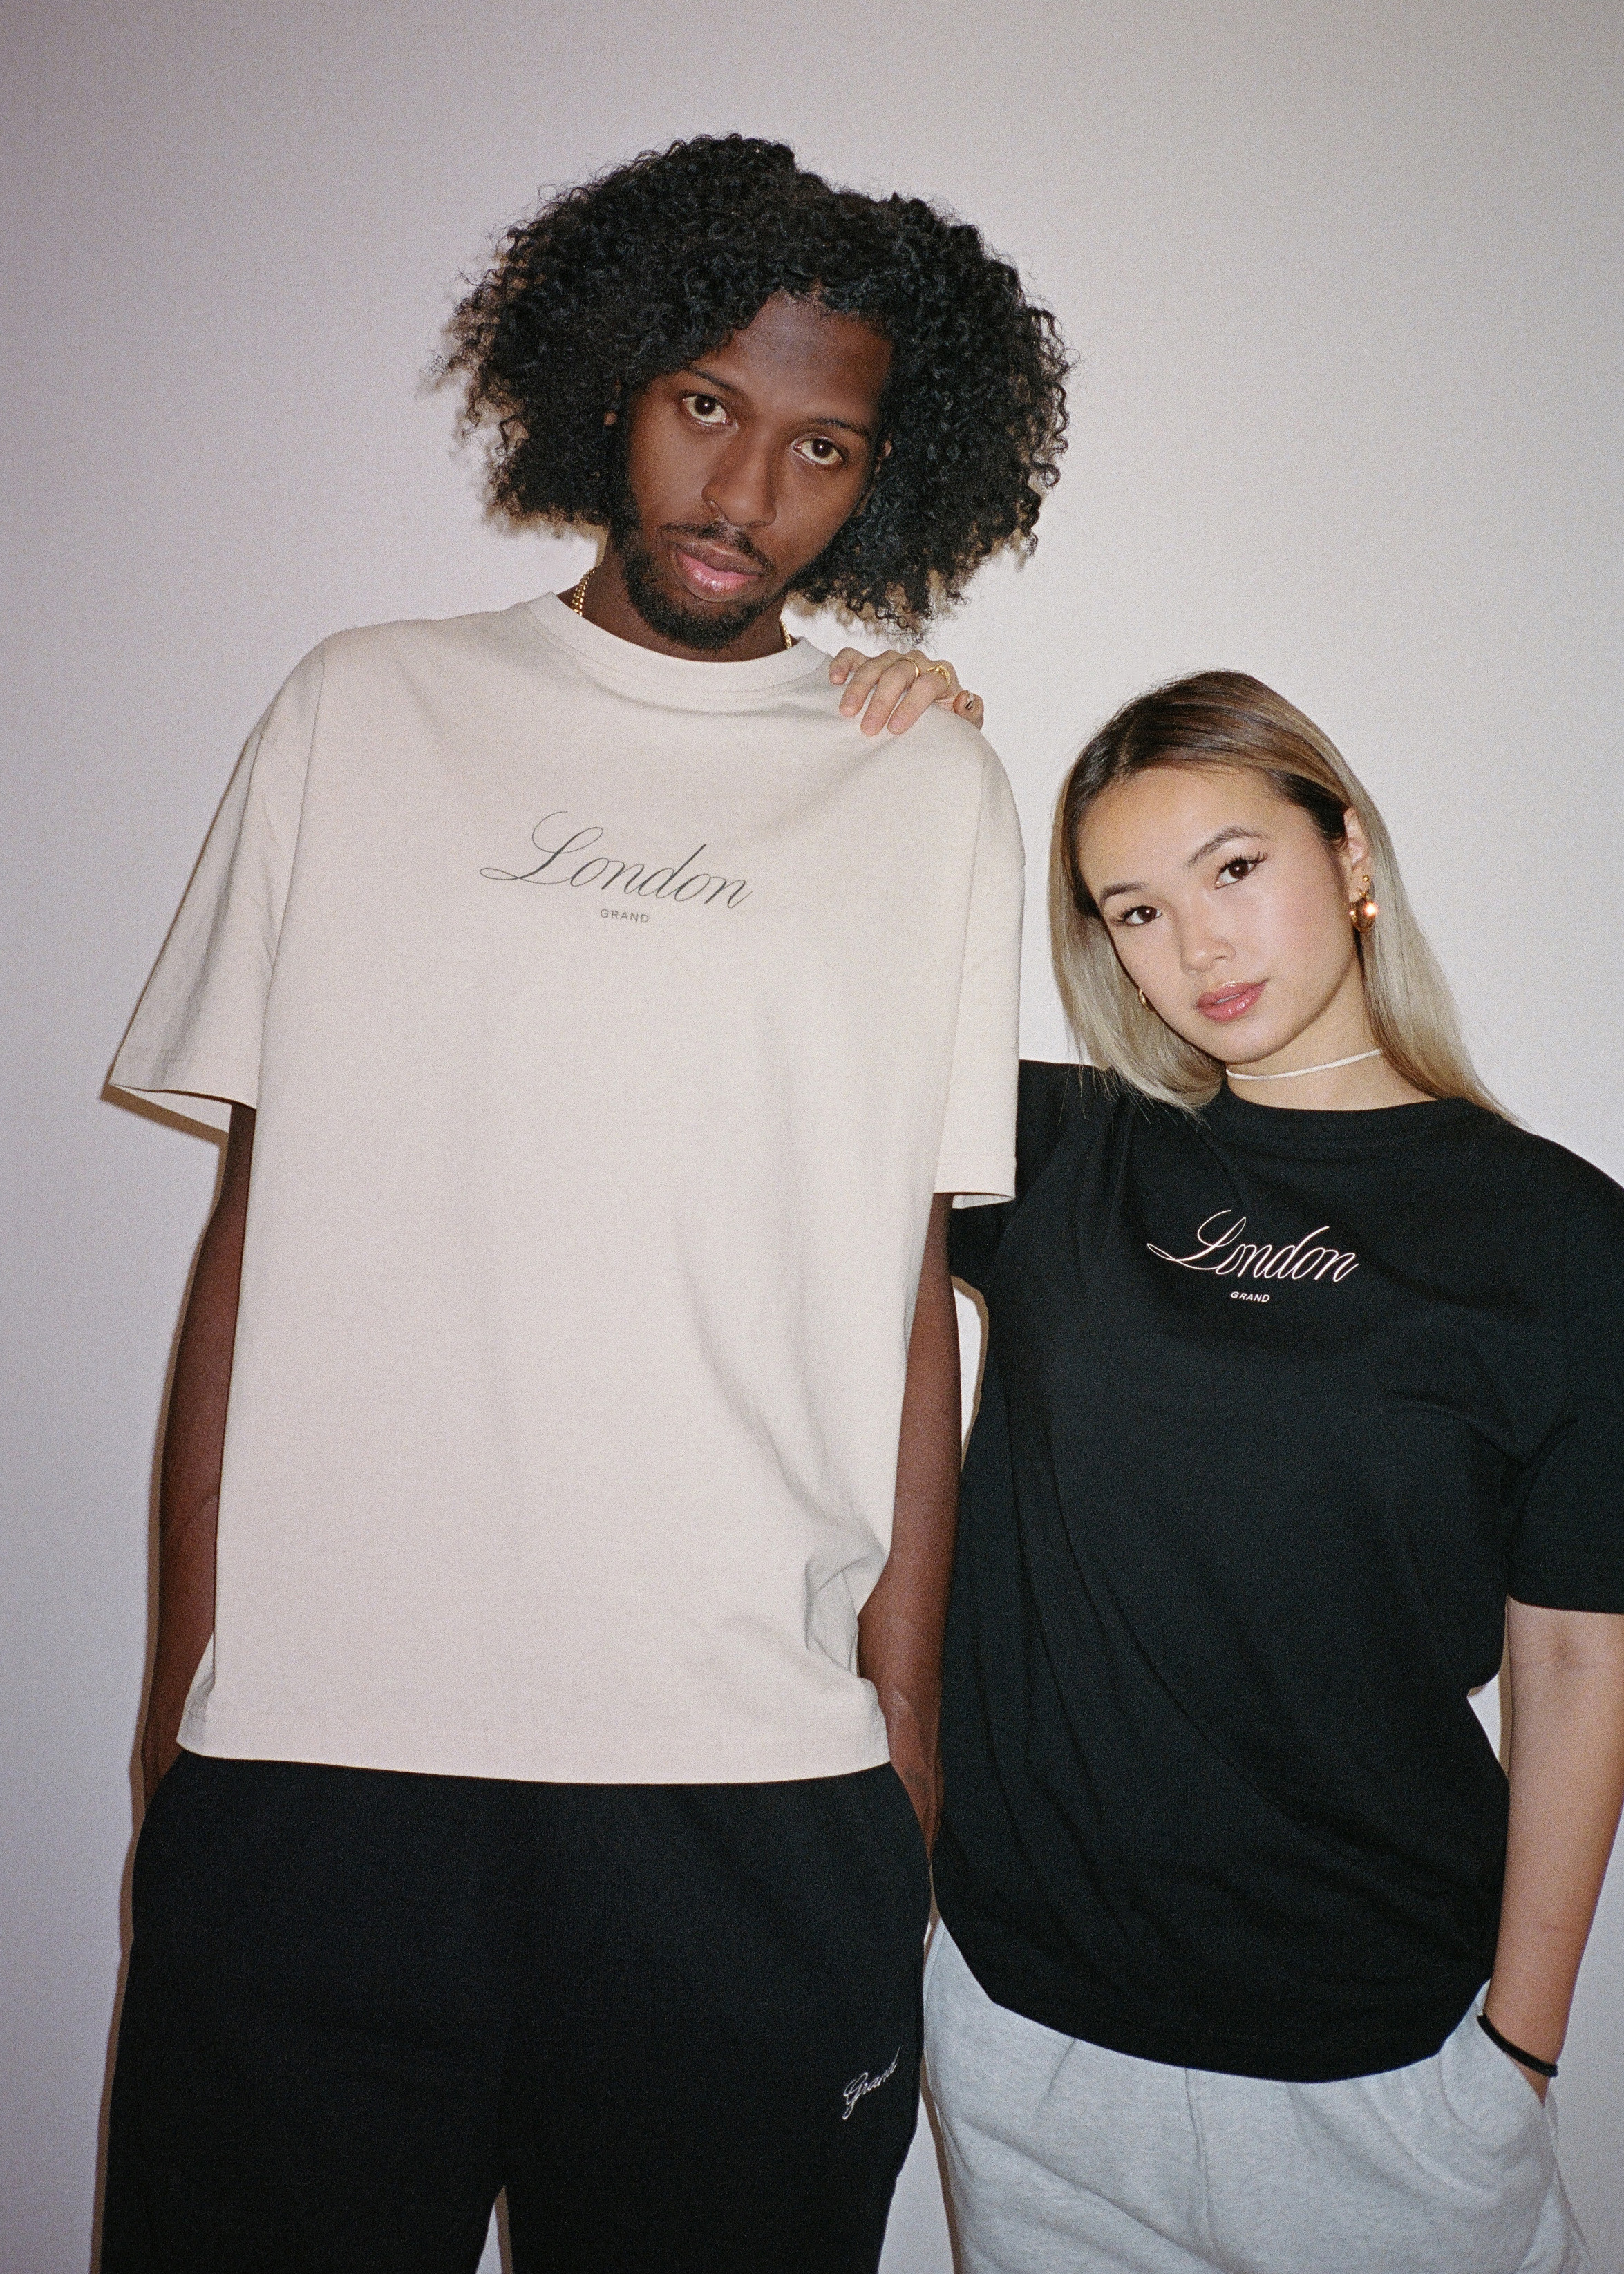 Grand Collection x End. Clothing